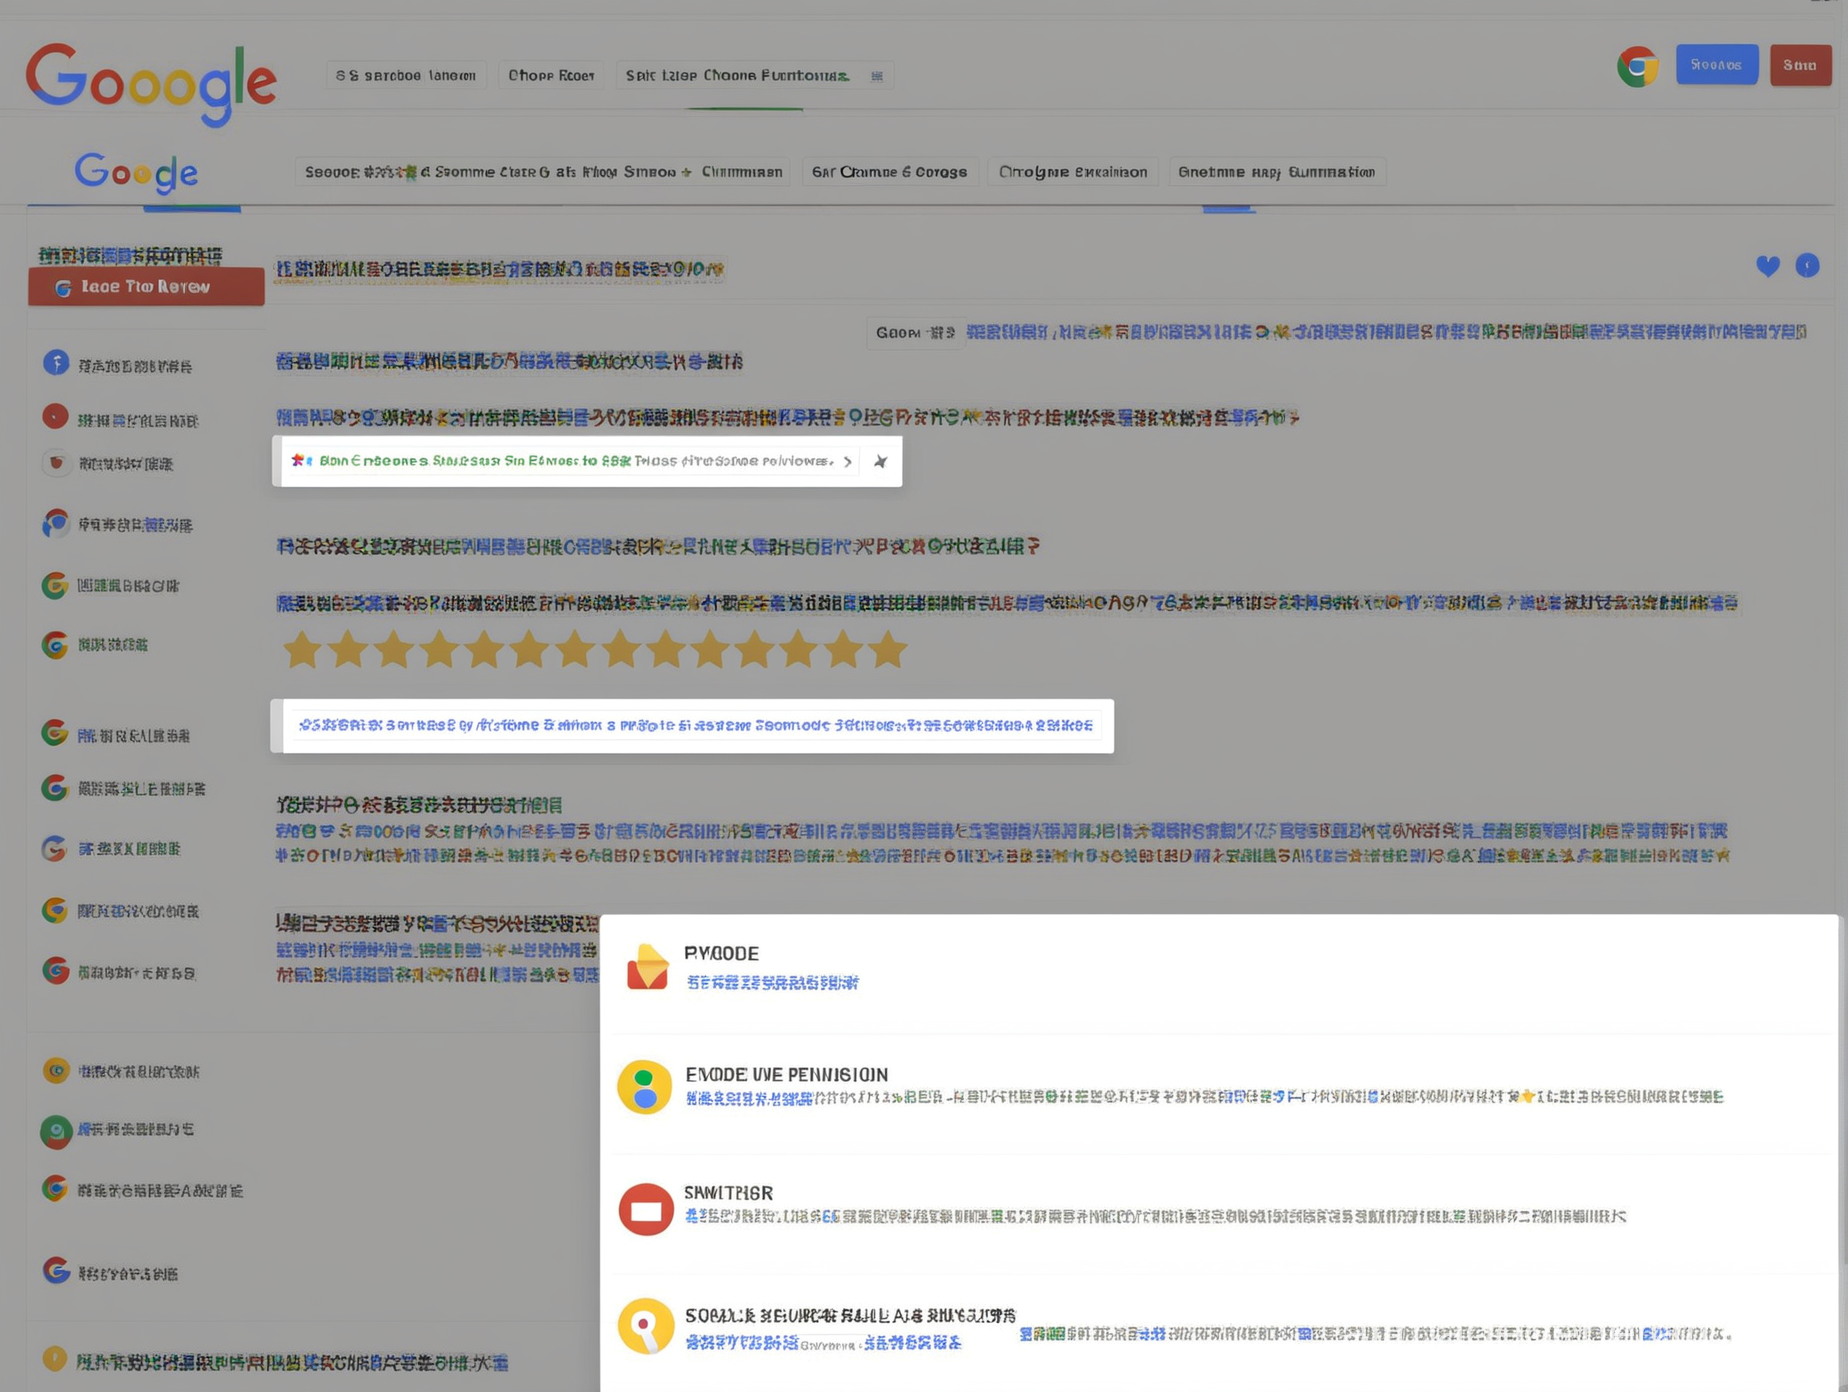 The basic functionality of this Chrome extension is to provide the user with an option to get summarized Google reviews for any Google place. Summarization is done using AI.